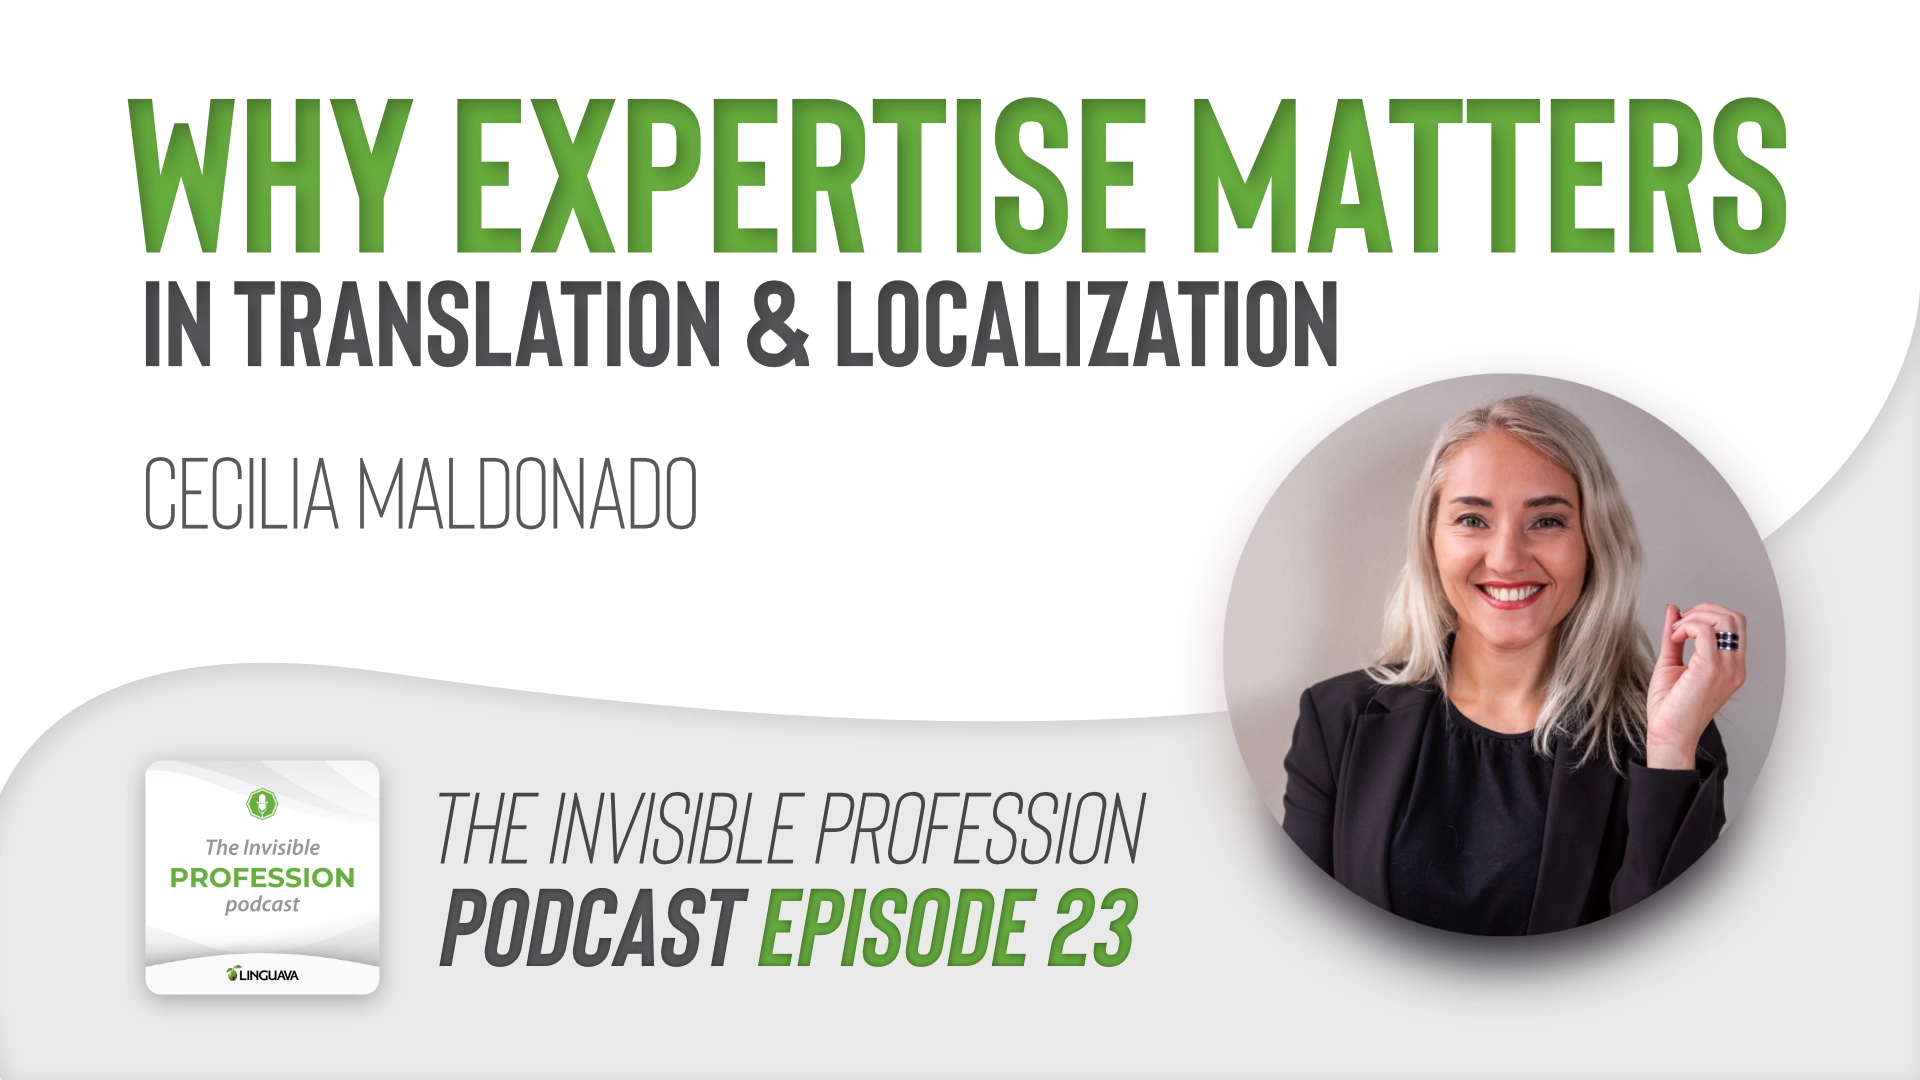 podcast thumbnail with ceci maldonado photo and text of why expertise matters in translation and localization